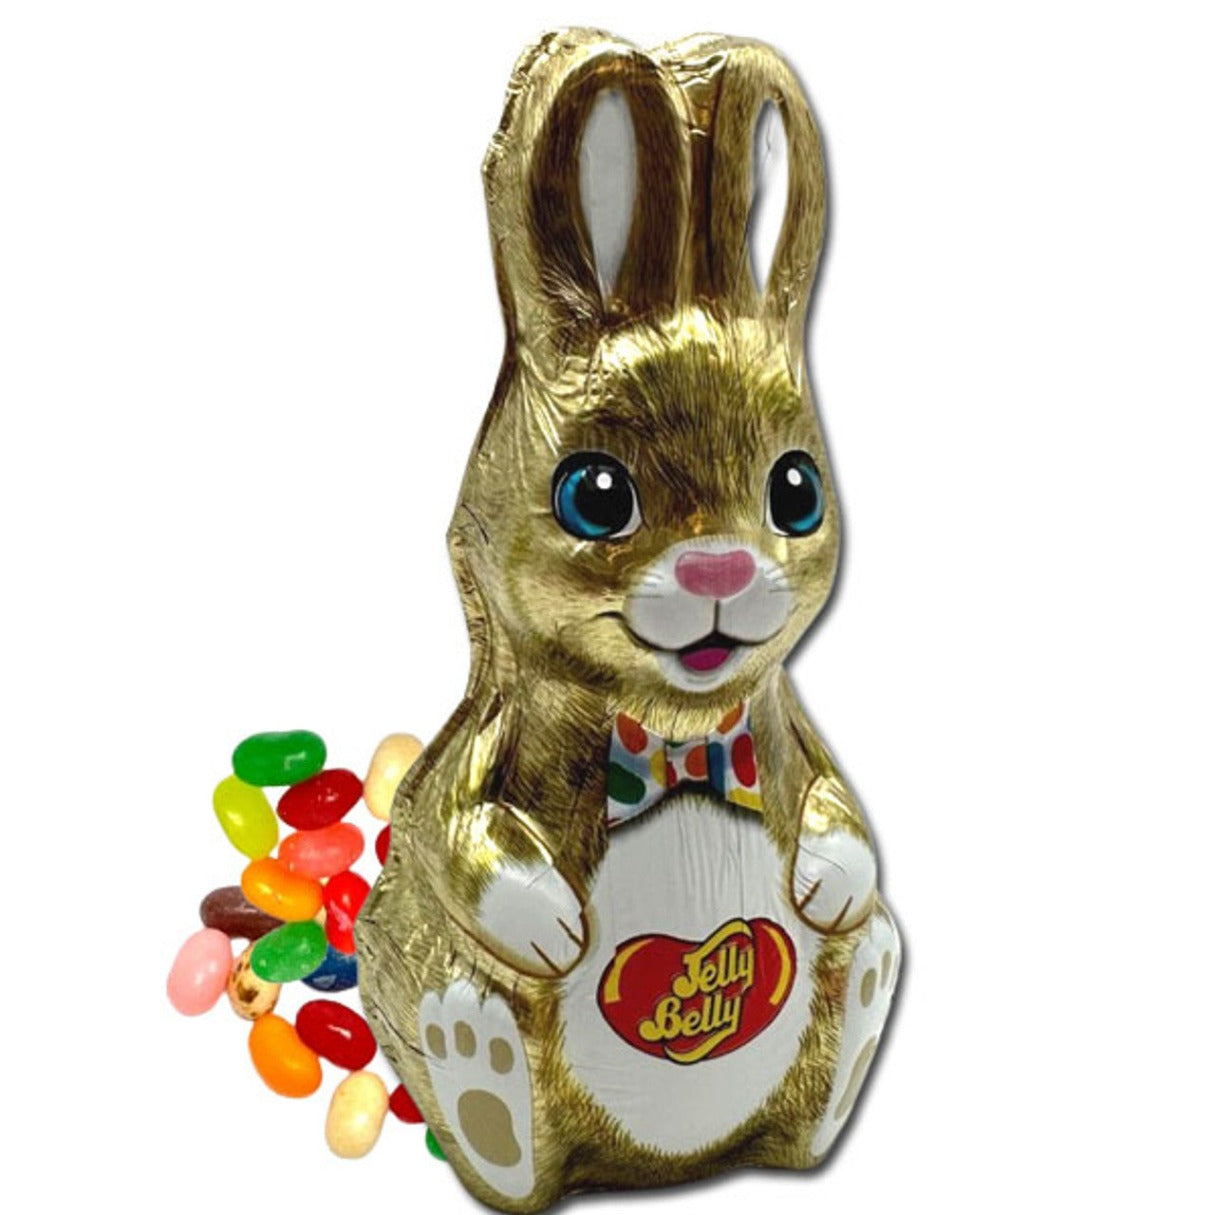 Chocolate Rabbit with Jelly Belly Jelly Beans 4.5oz -6ct